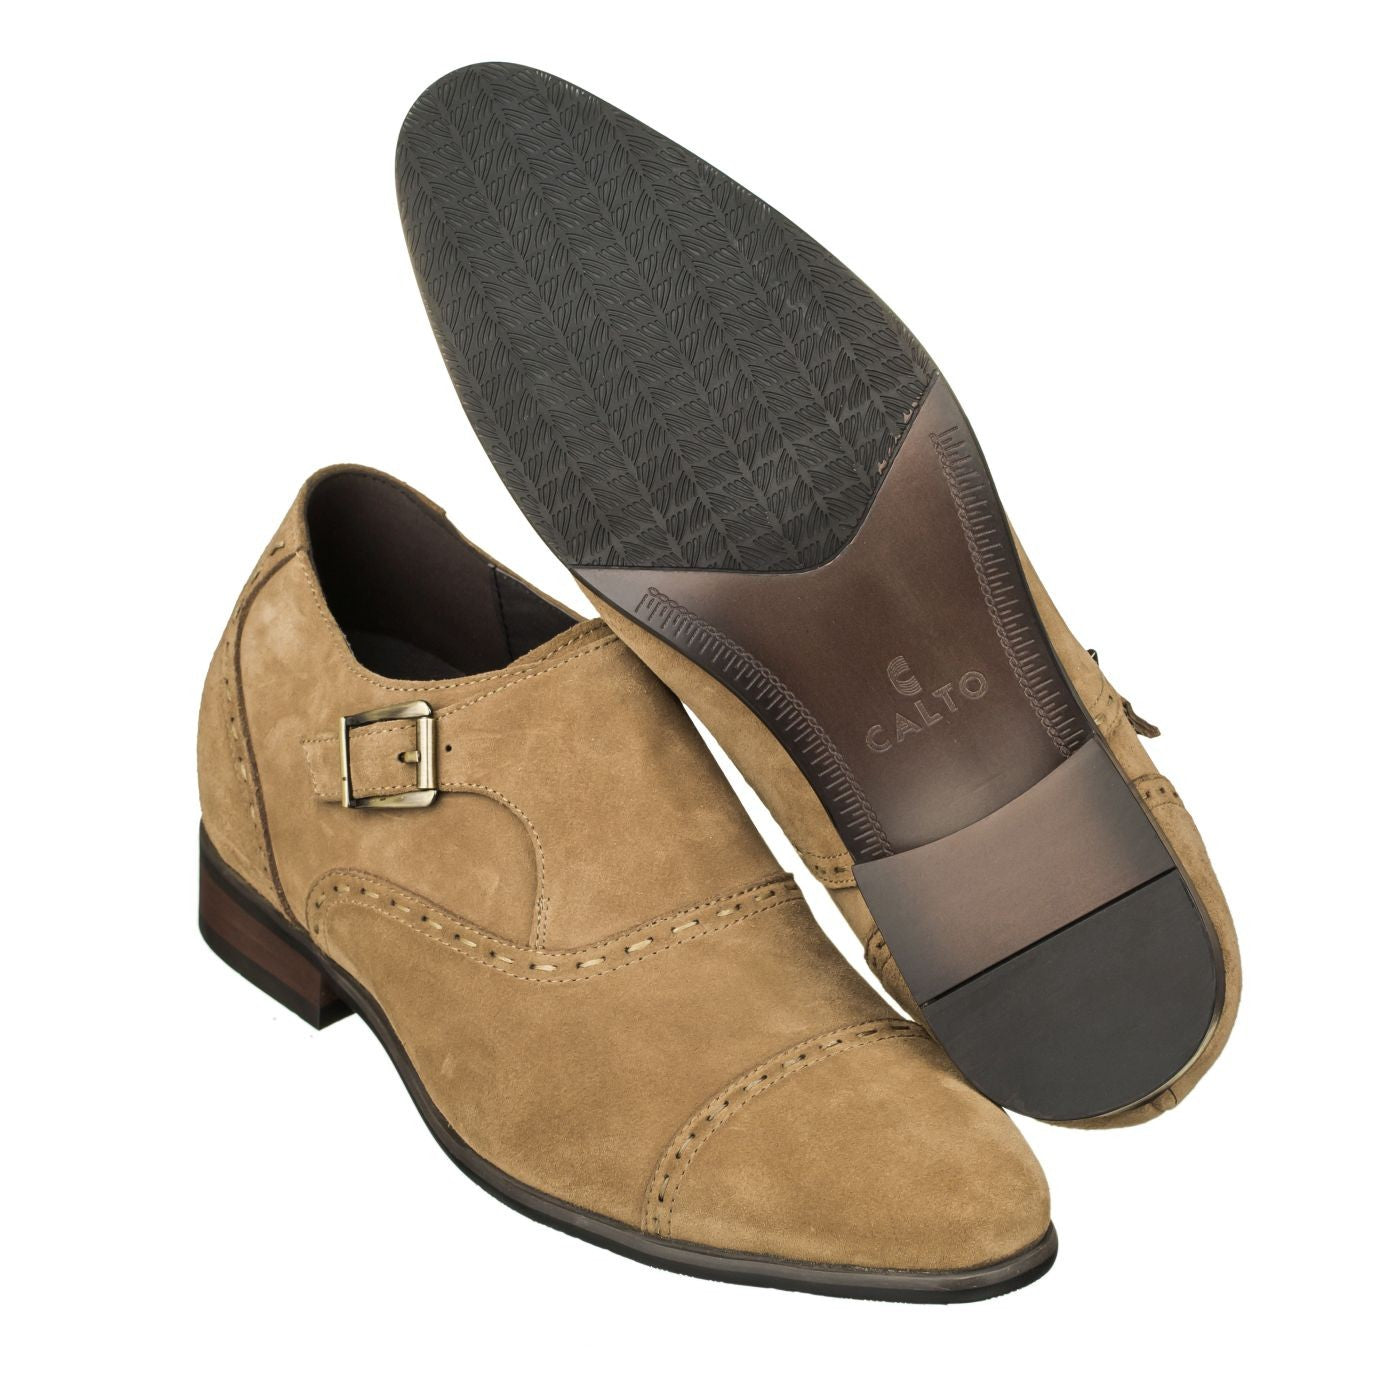 Elevator shoes height increase Slip-On CALTO Khaki Dress Shoes - Three Inches - S1085